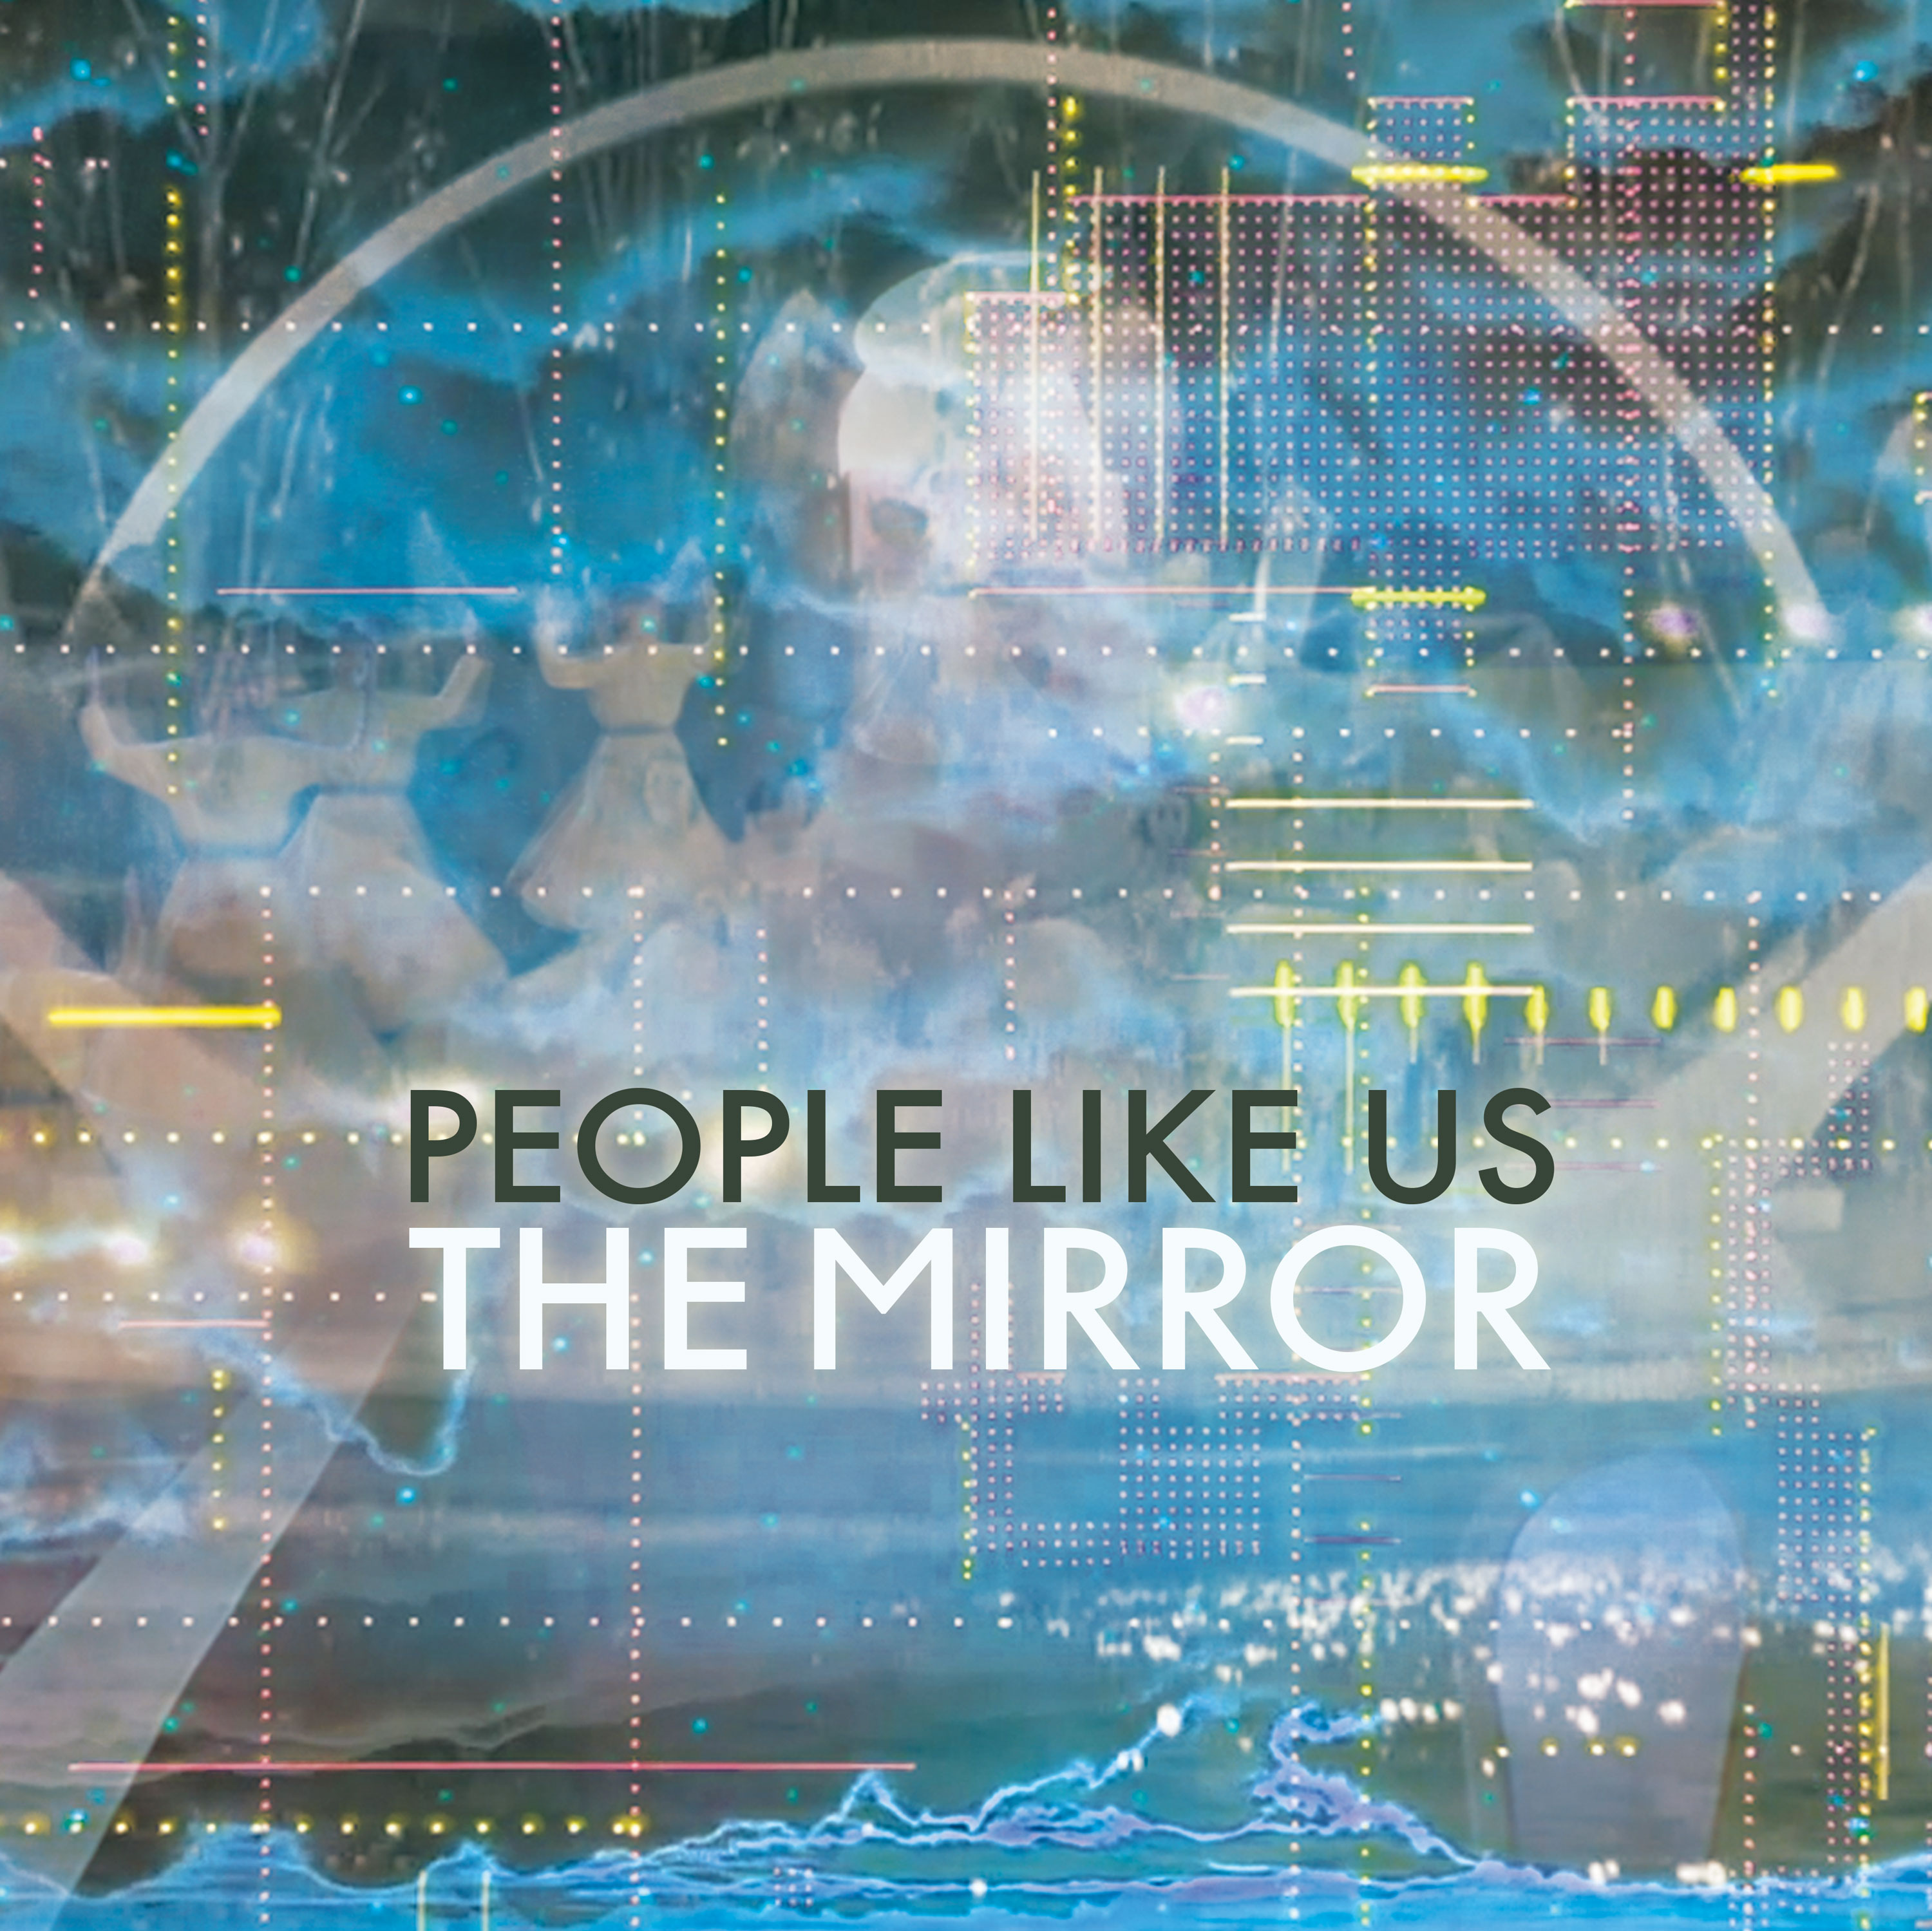 Cover art for the People Like Us album “The Mirror”, by Vicki Bennet.